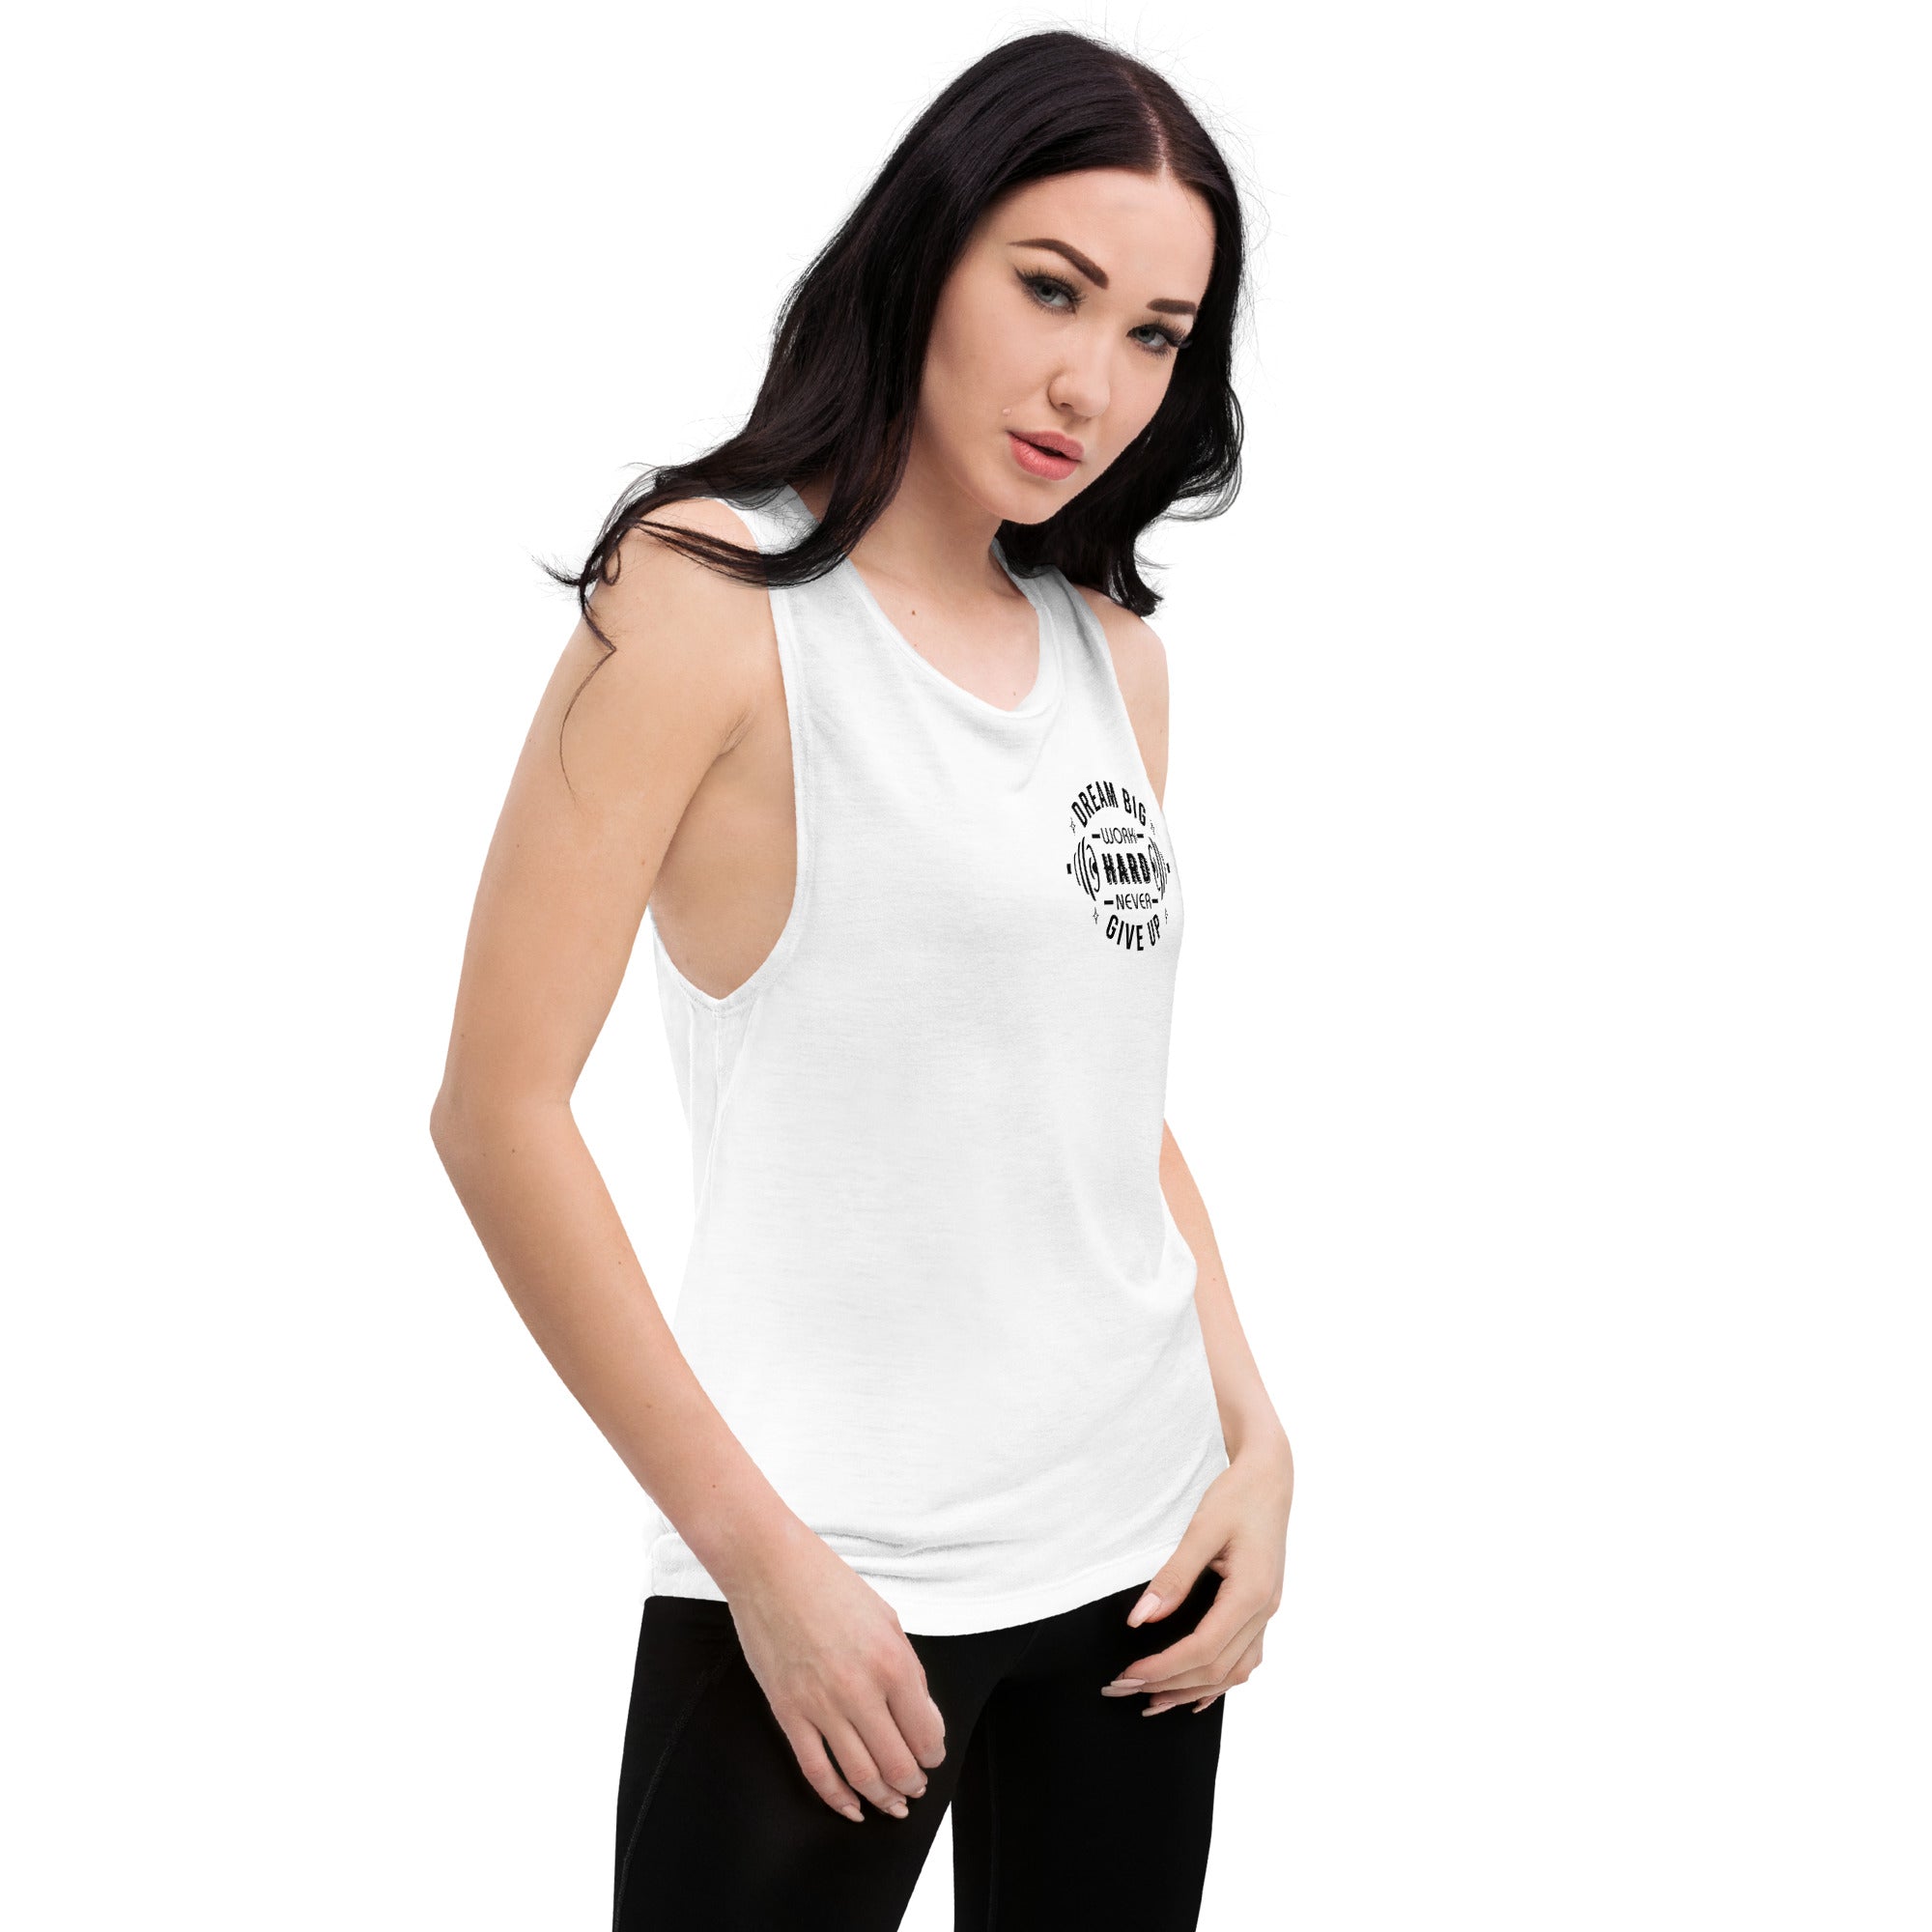 Ladies’ Muscle Tank | Women's Tank Tops Australia - Revive Wear     Women's tank tops Australia. Low-cut armholes. Great for Workouts, Yoga, and Running. 10 % Discount. Shop with Revive Wear for Free Delivery.